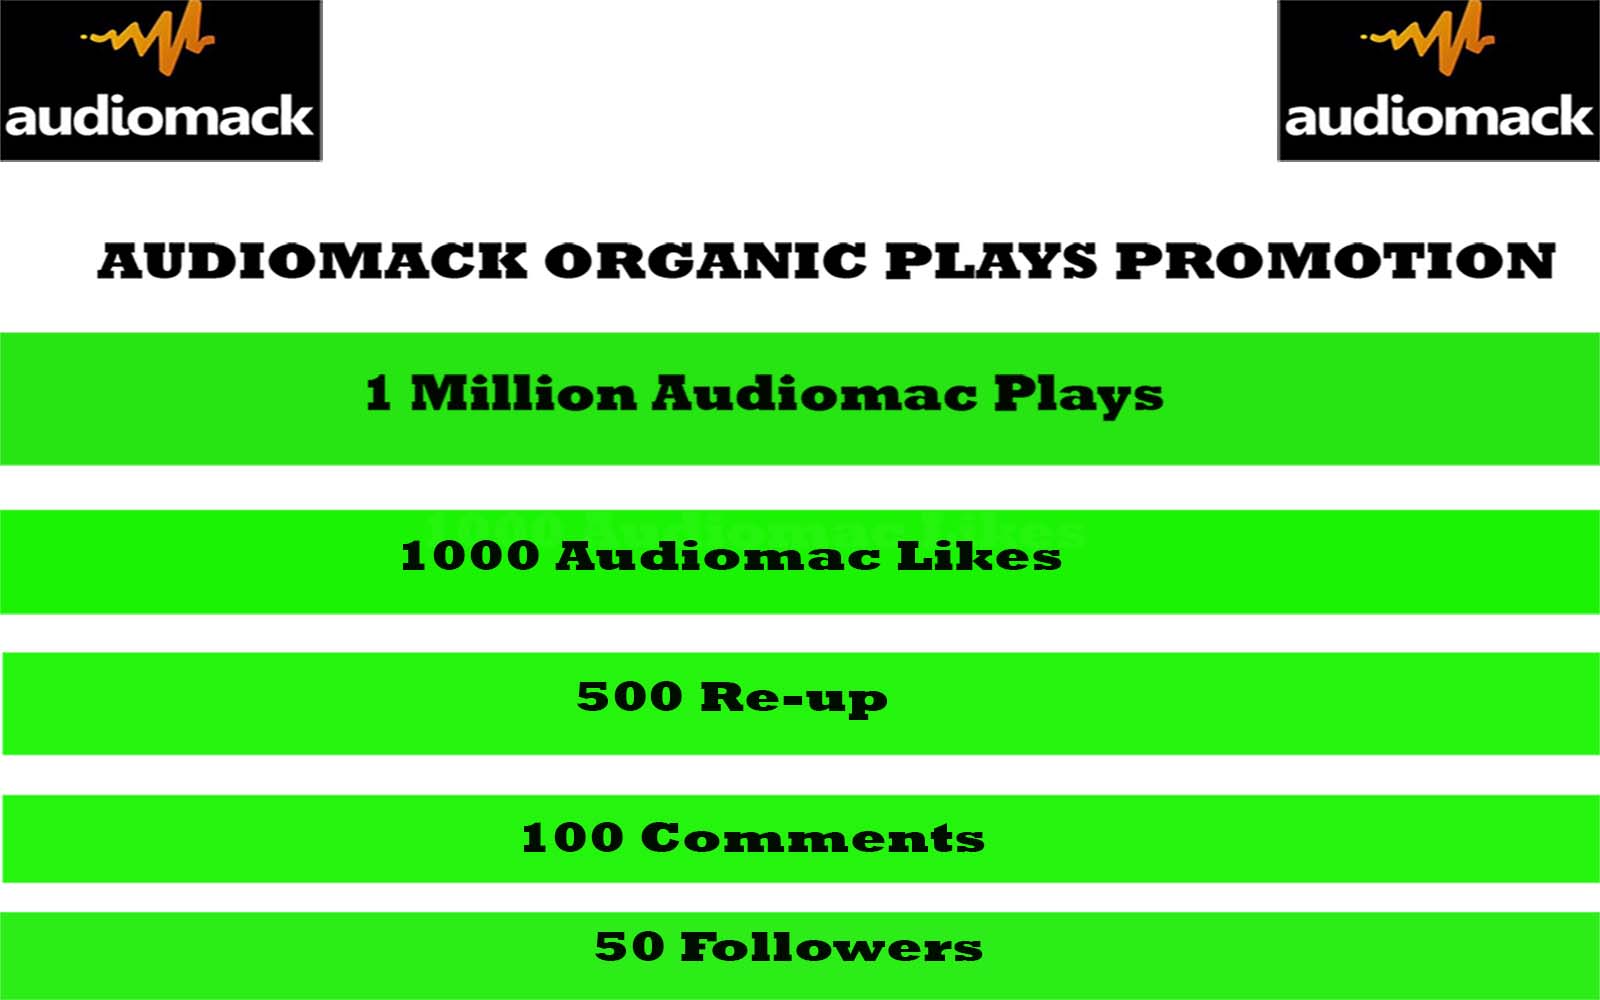 1 MILLION AUDIOMACK ORGANIC PLAYS WITH 1000 LIKES 500 REPOSTS 100 COMMENTS 50 FOLLOWERS